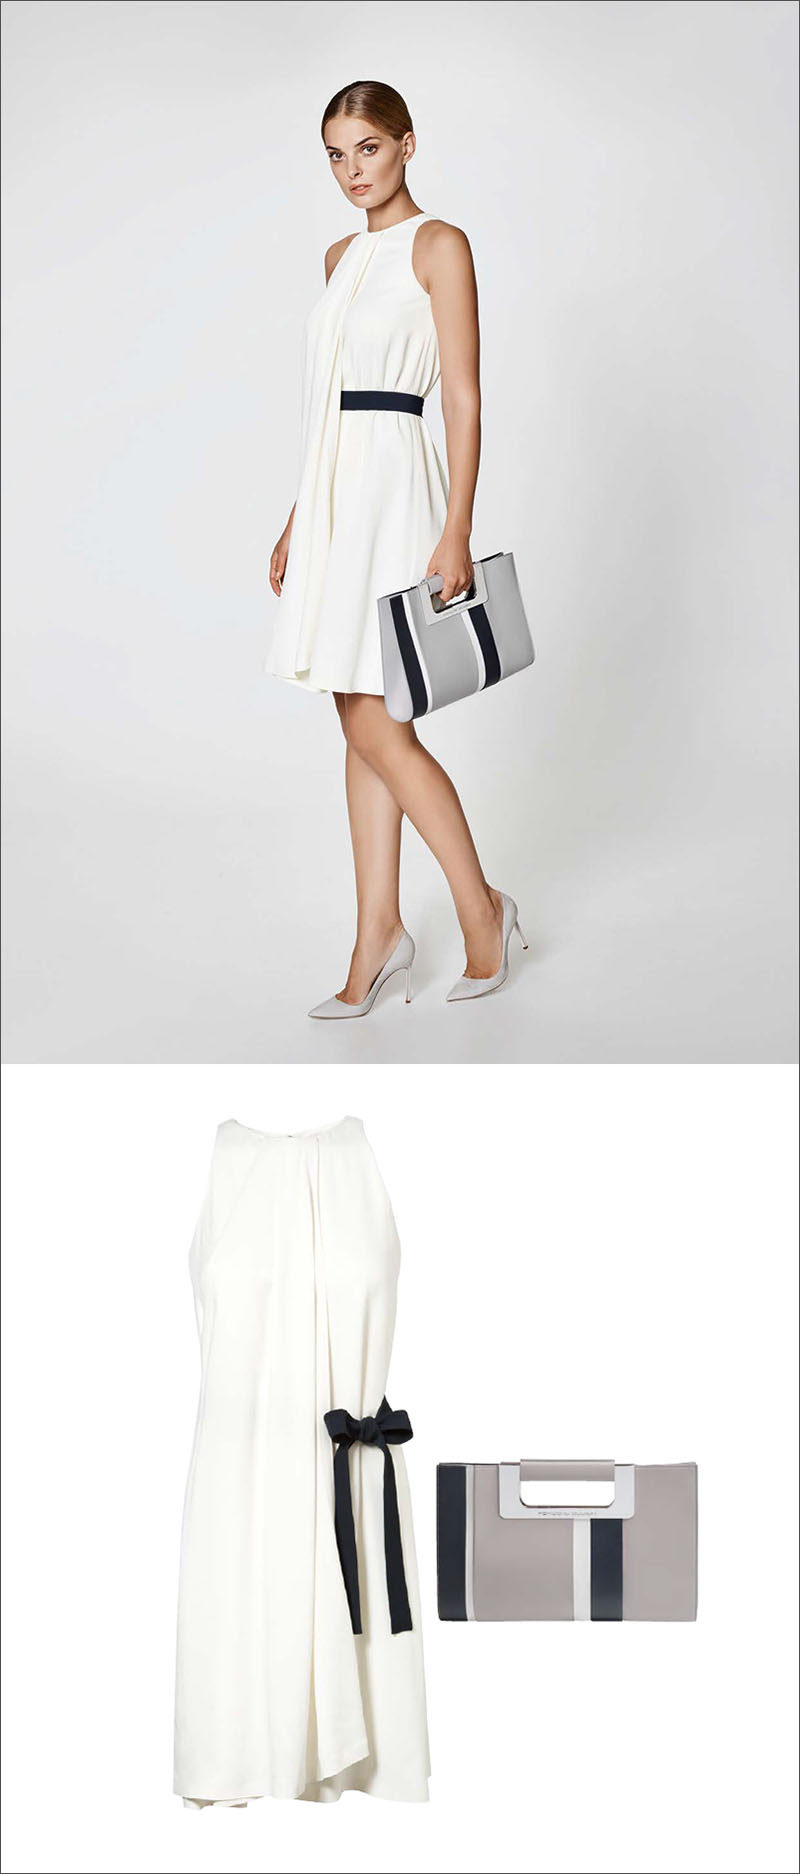 Women's Fashion Ideas - 12 Womens Outfits From Porsche Design's 2017 Spring/Summer Collection // This simple white women's dress featuring a navy side bow and a navy and grey clutch create the perfect spring evening outfit.